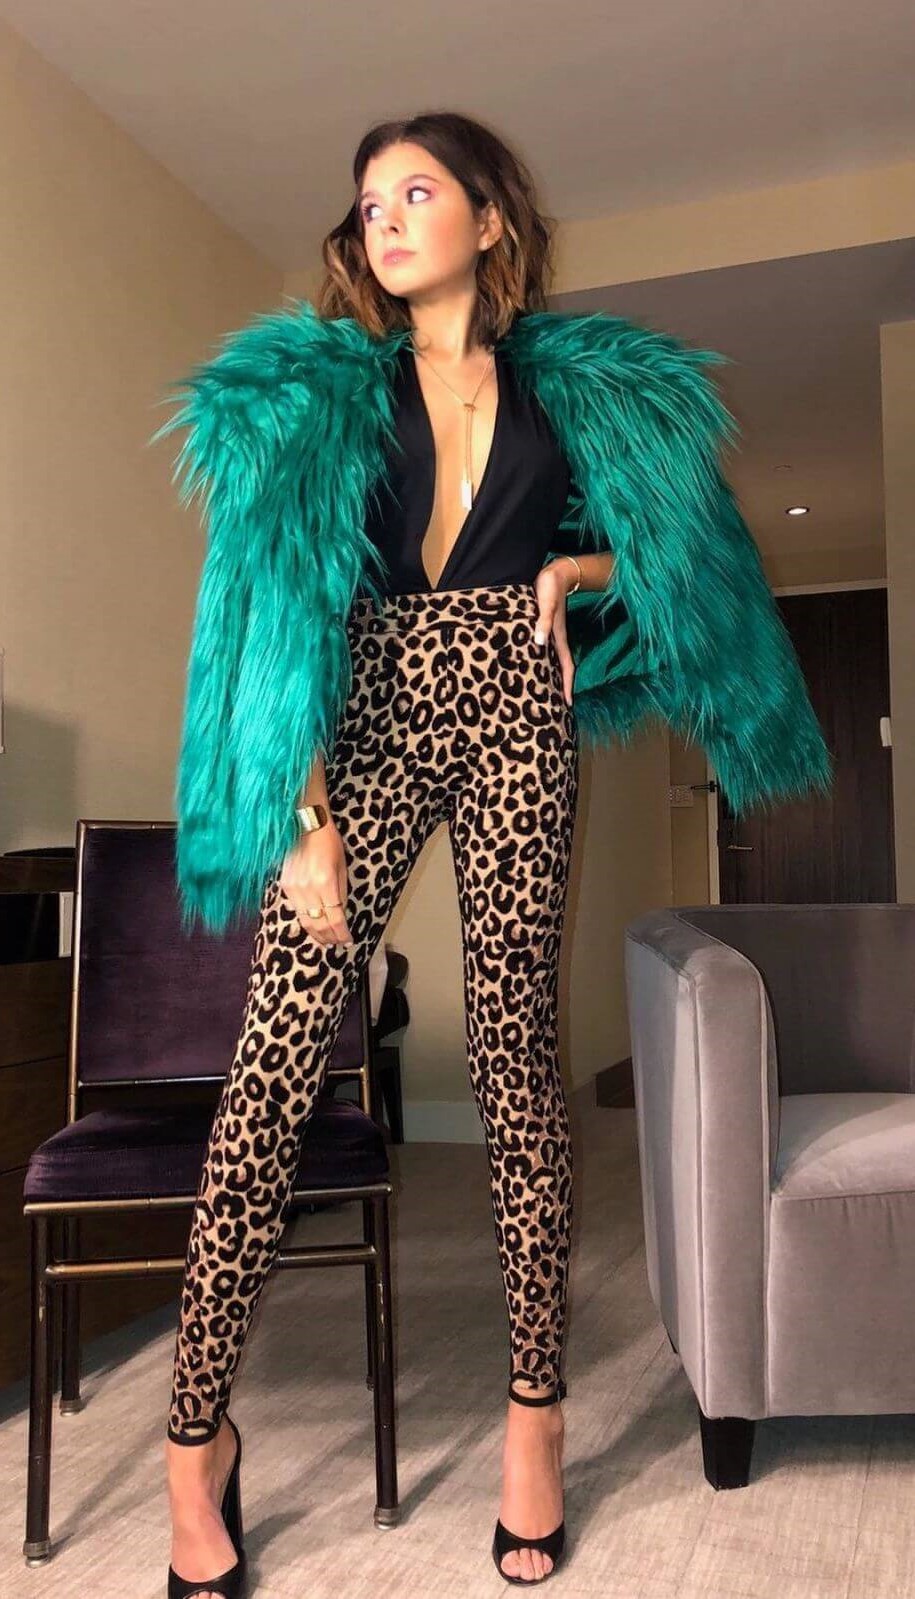 Addison Riecke In Deep Neck Animal Print Jumpsuit With Bright Green Fur Coat